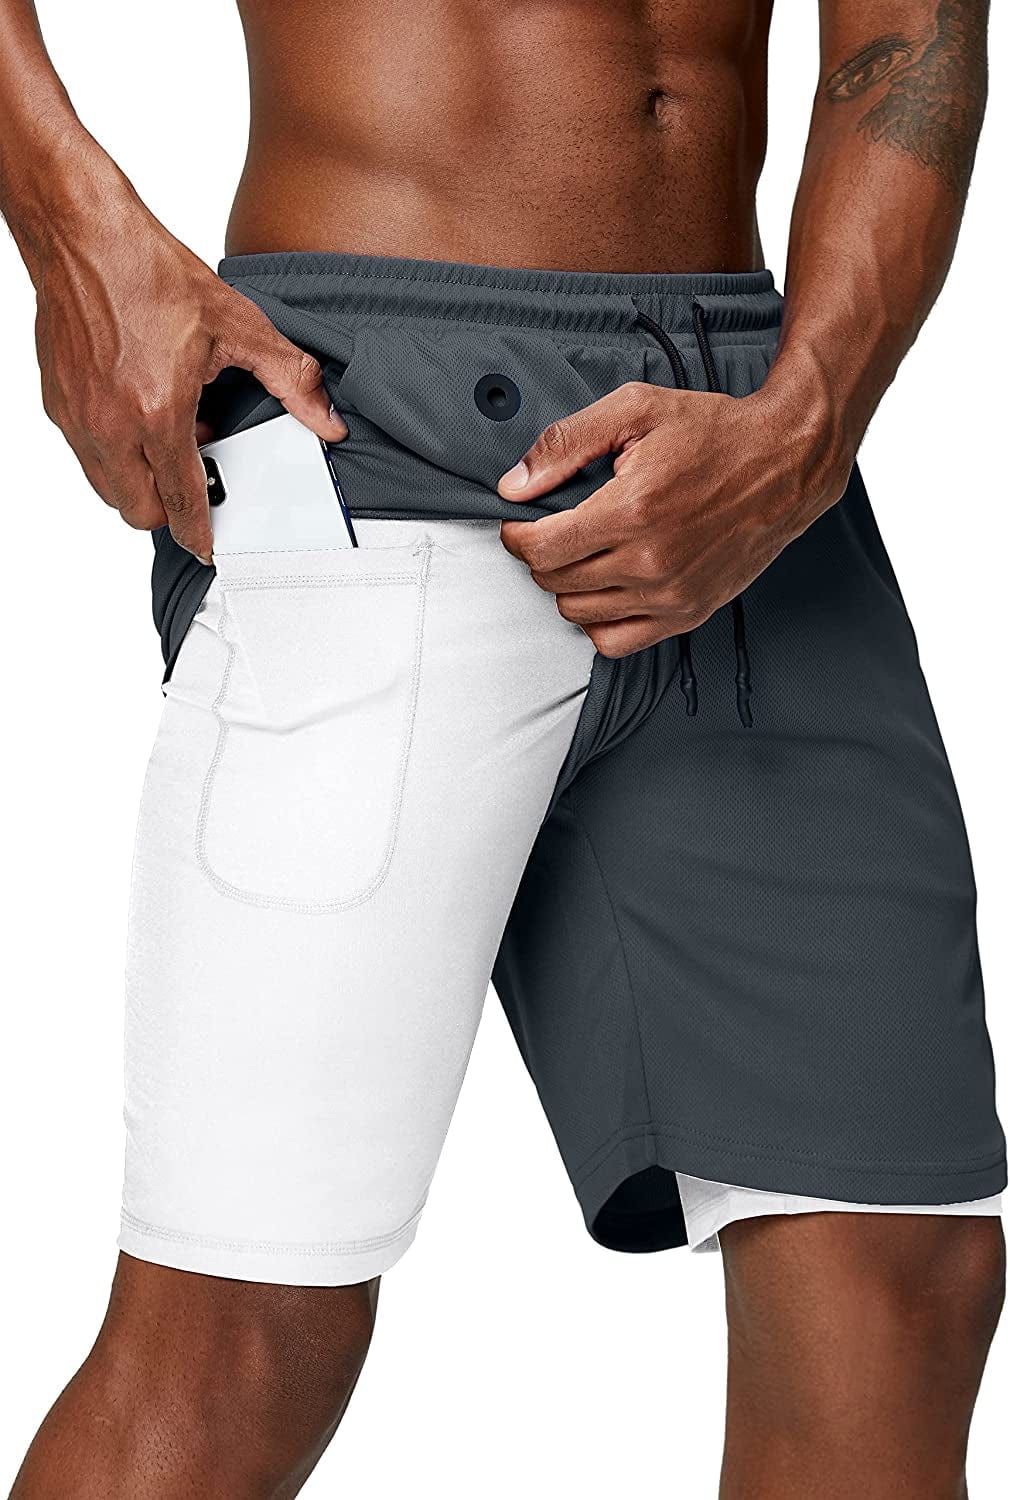 Pinkbomb Men'S 2 in 1 Running Shorts Gym Workout Quick Dry Mens Shorts with Phone Pocket Animals & Pet Supplies > Pet Supplies > Dog Supplies > Dog Apparel Pinkbomb Grey2 XX-Large 